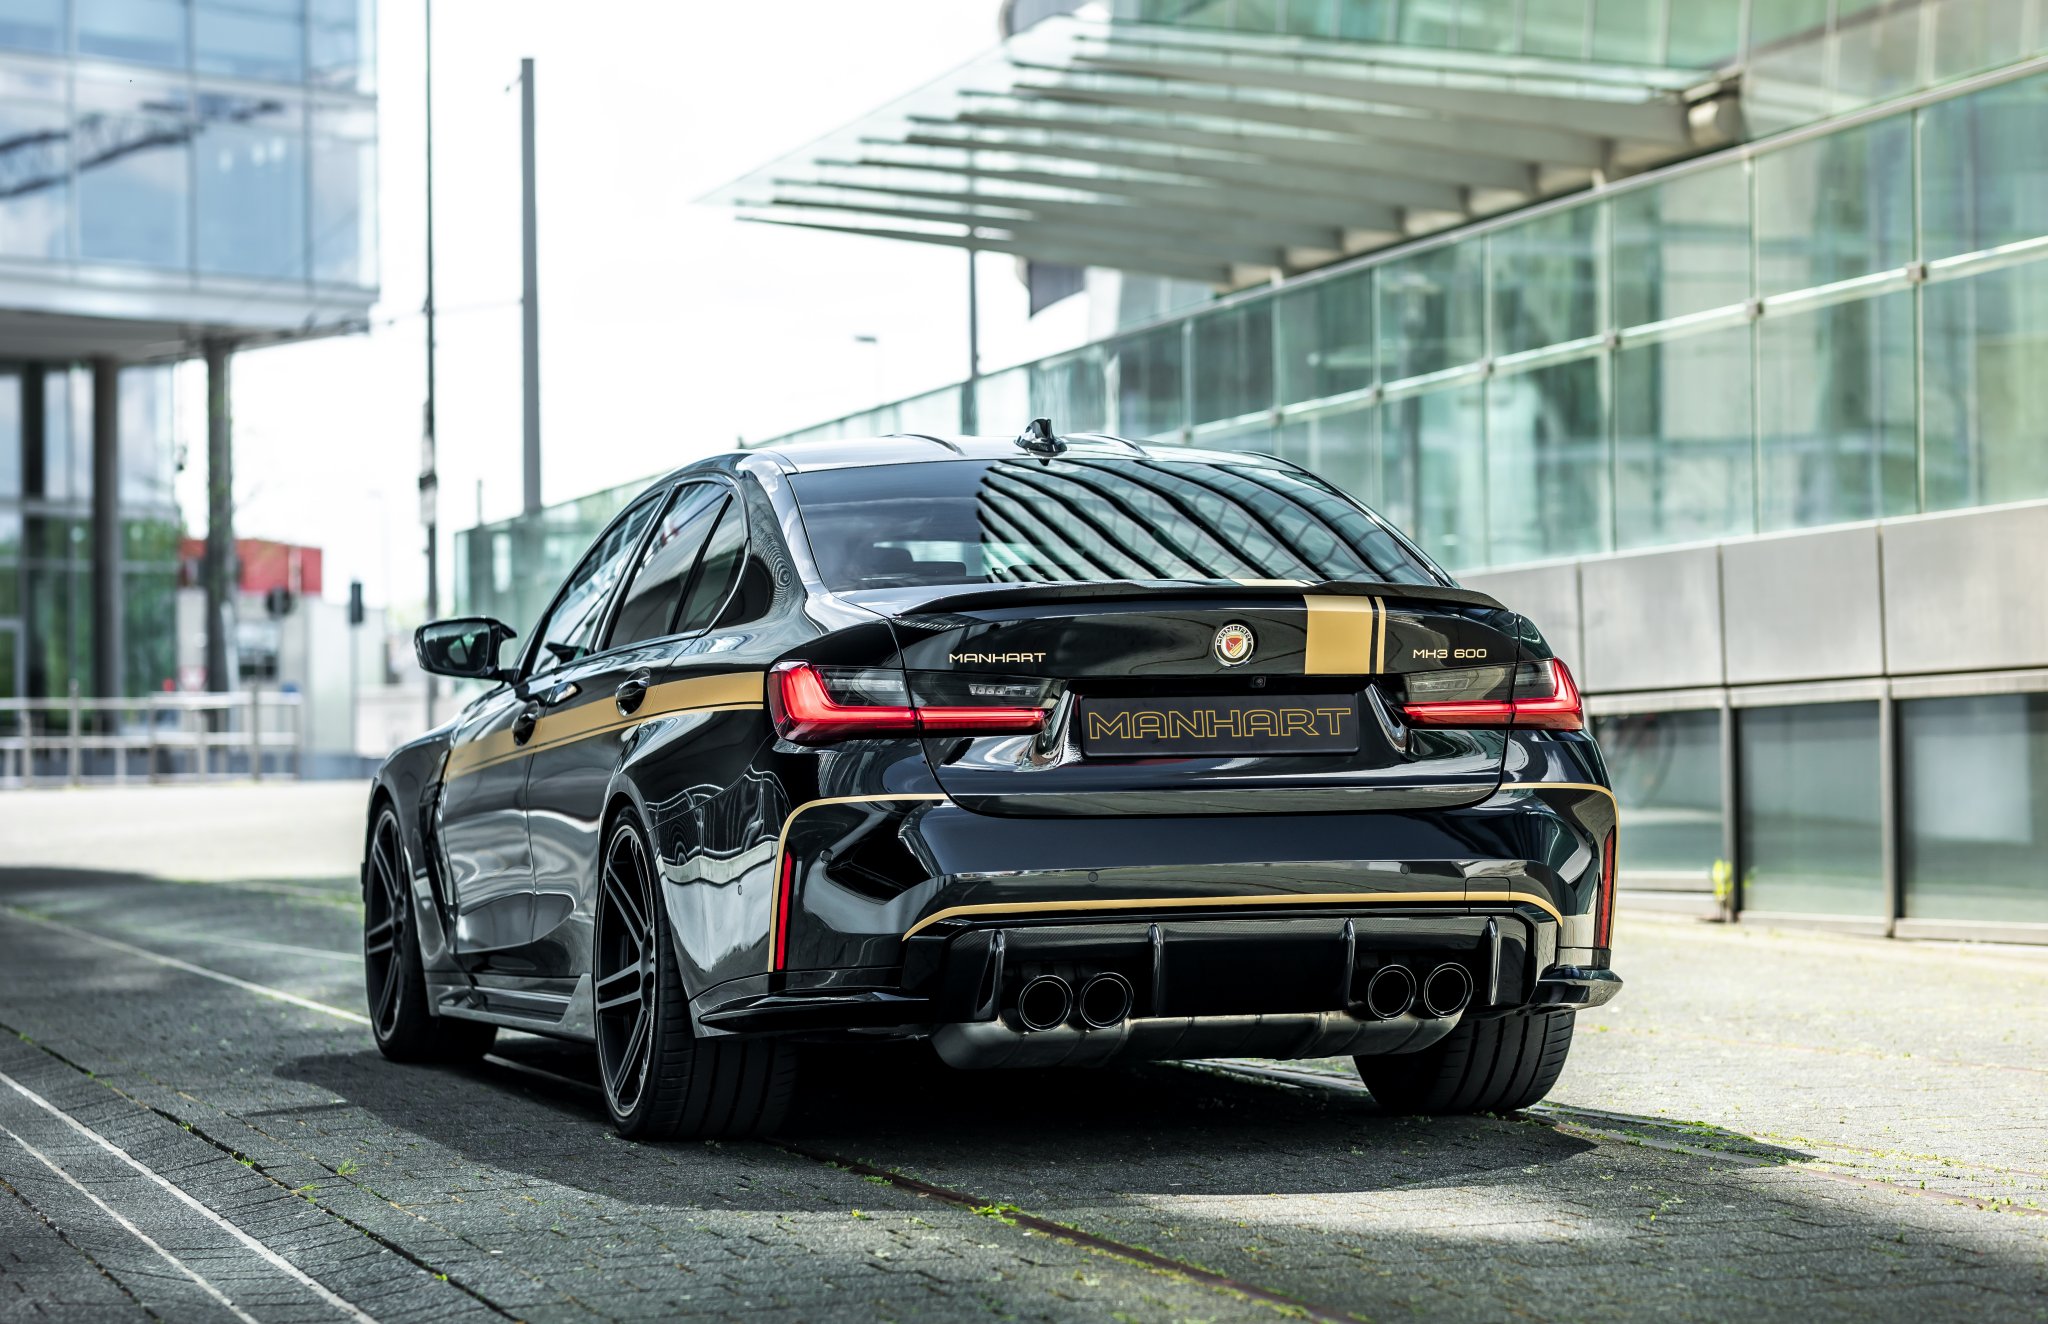 Check our price and buy an Manhart carbon fiber body kit for BMW M3 G80!